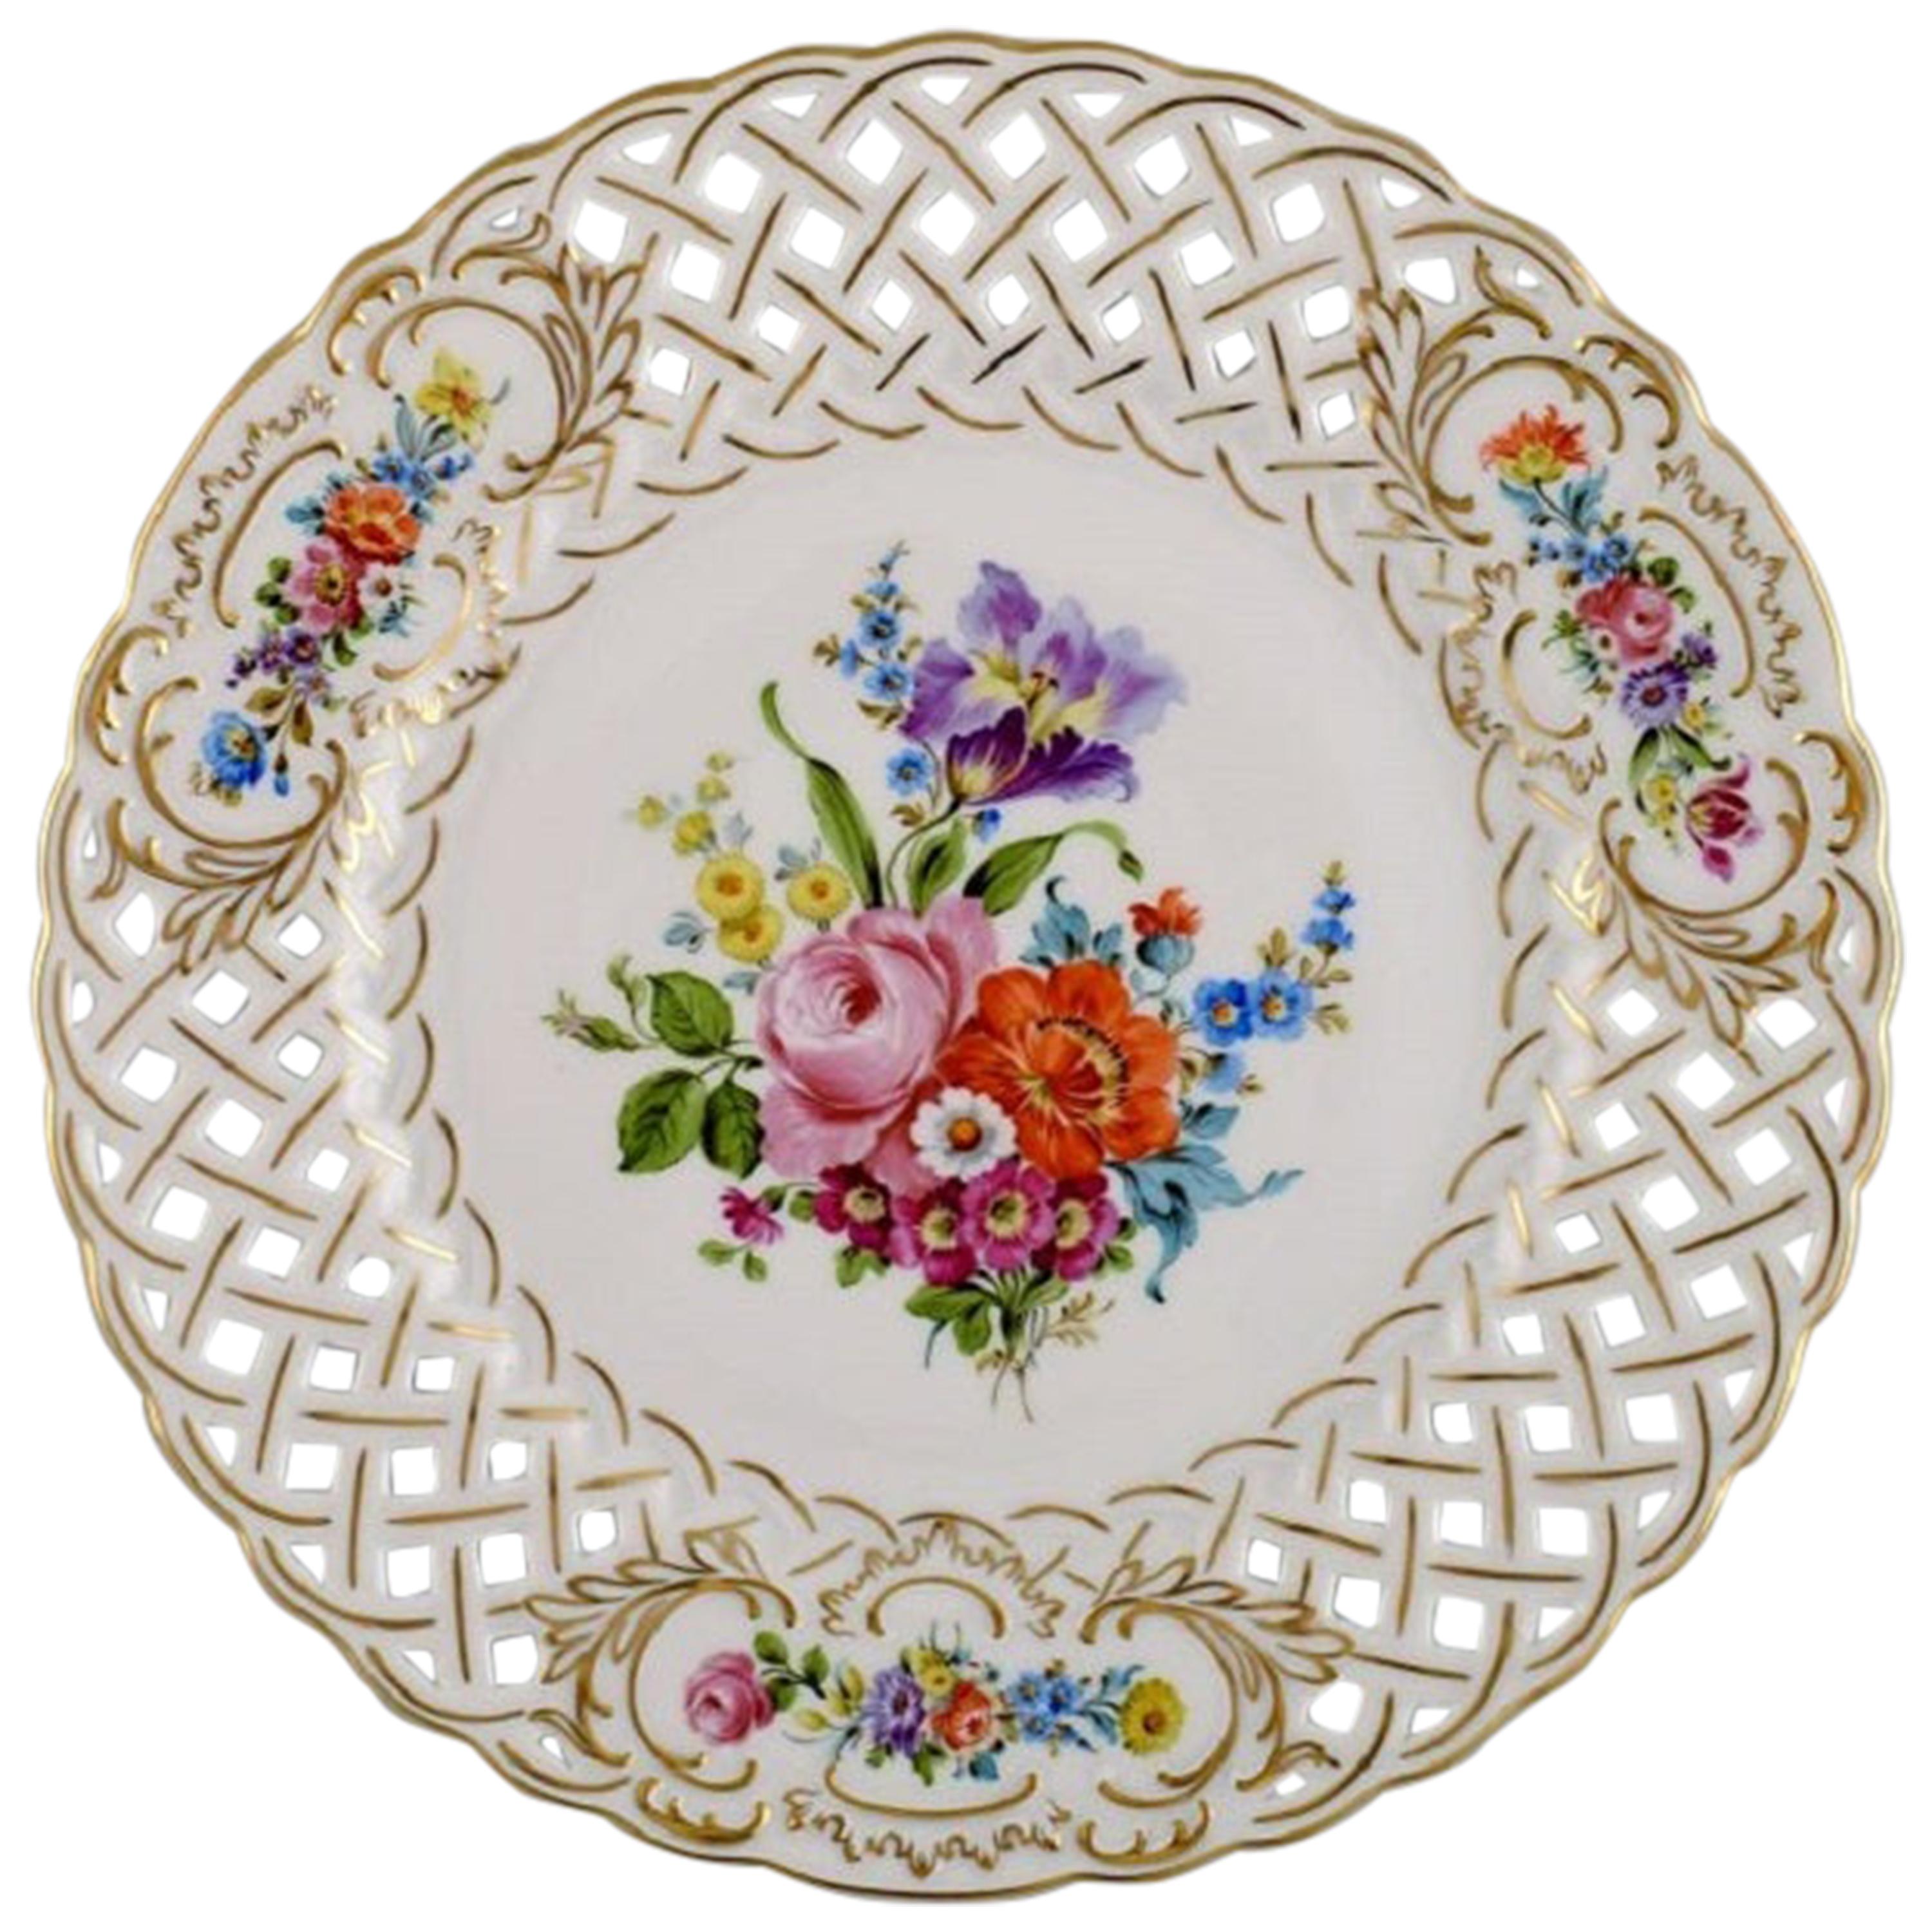 Hutschenreuther Dinner Plate in Openwork Porcelain with Hand Painted Flowers